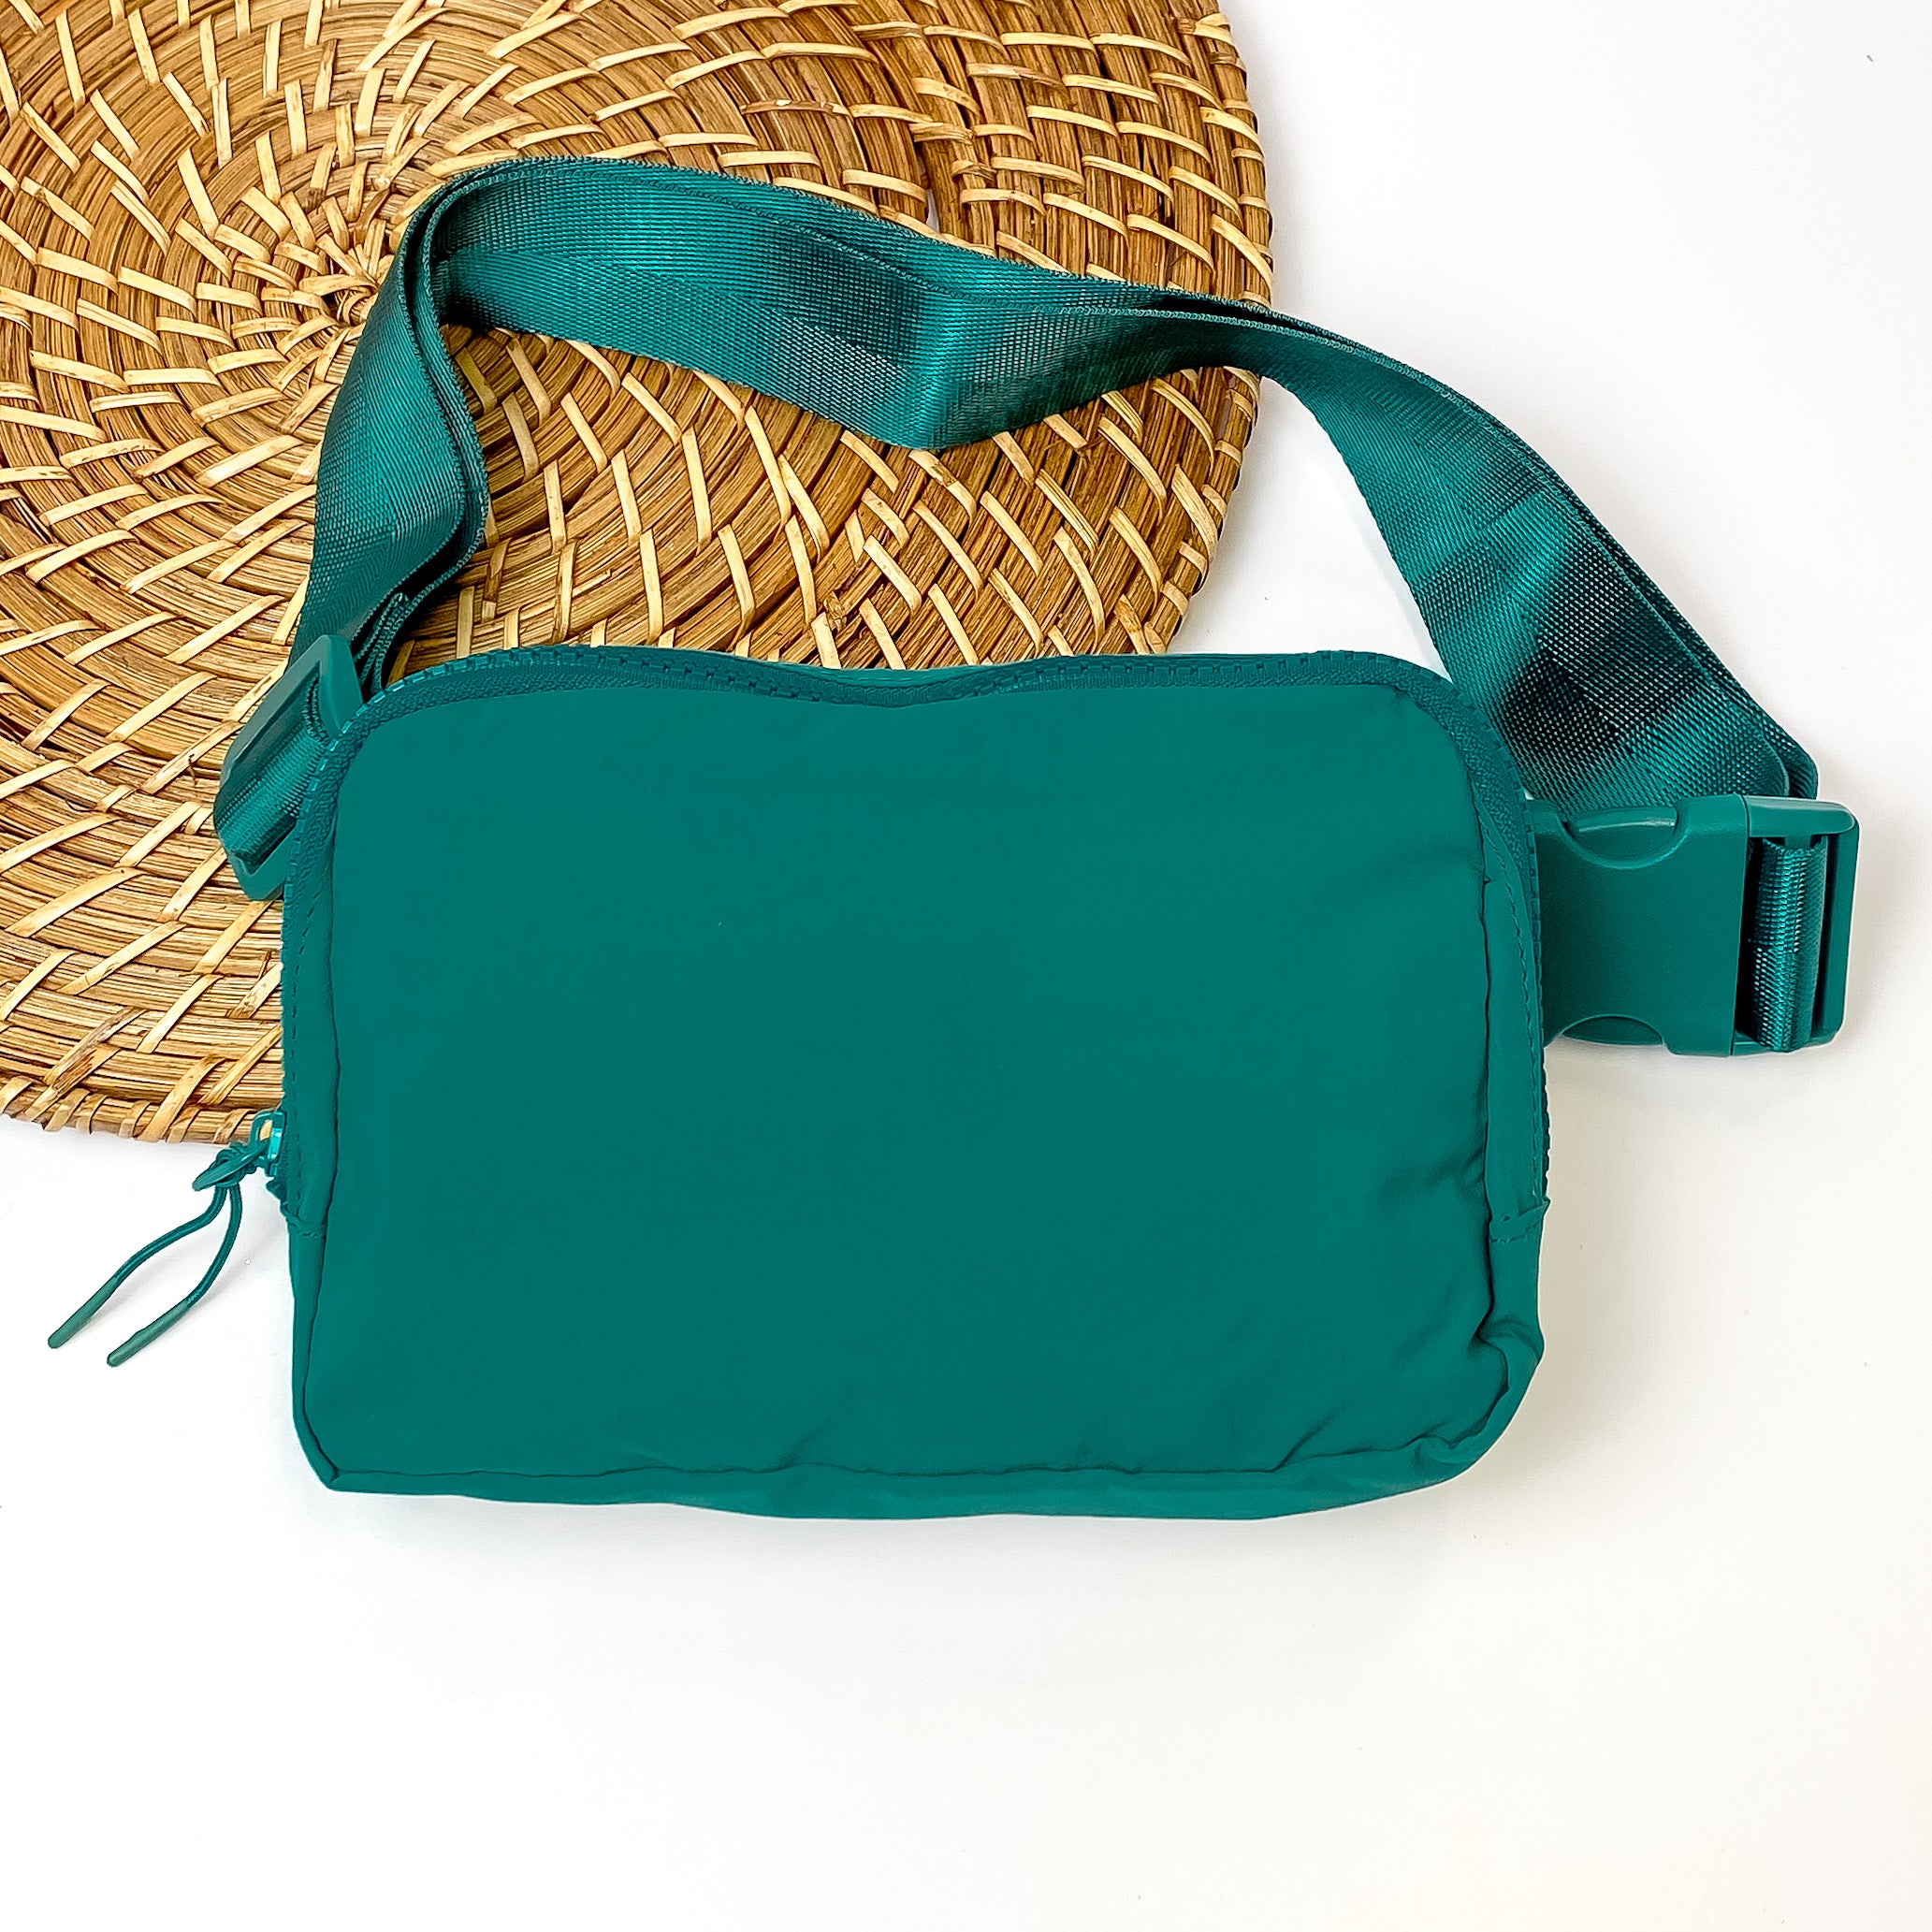 Pictured is a rectangle fanny pack with a top zipper with tassel in everglade green. This bag also includes a everglade green strap and everglade green accents. This bag is pictured on a white and brown patterned background. 